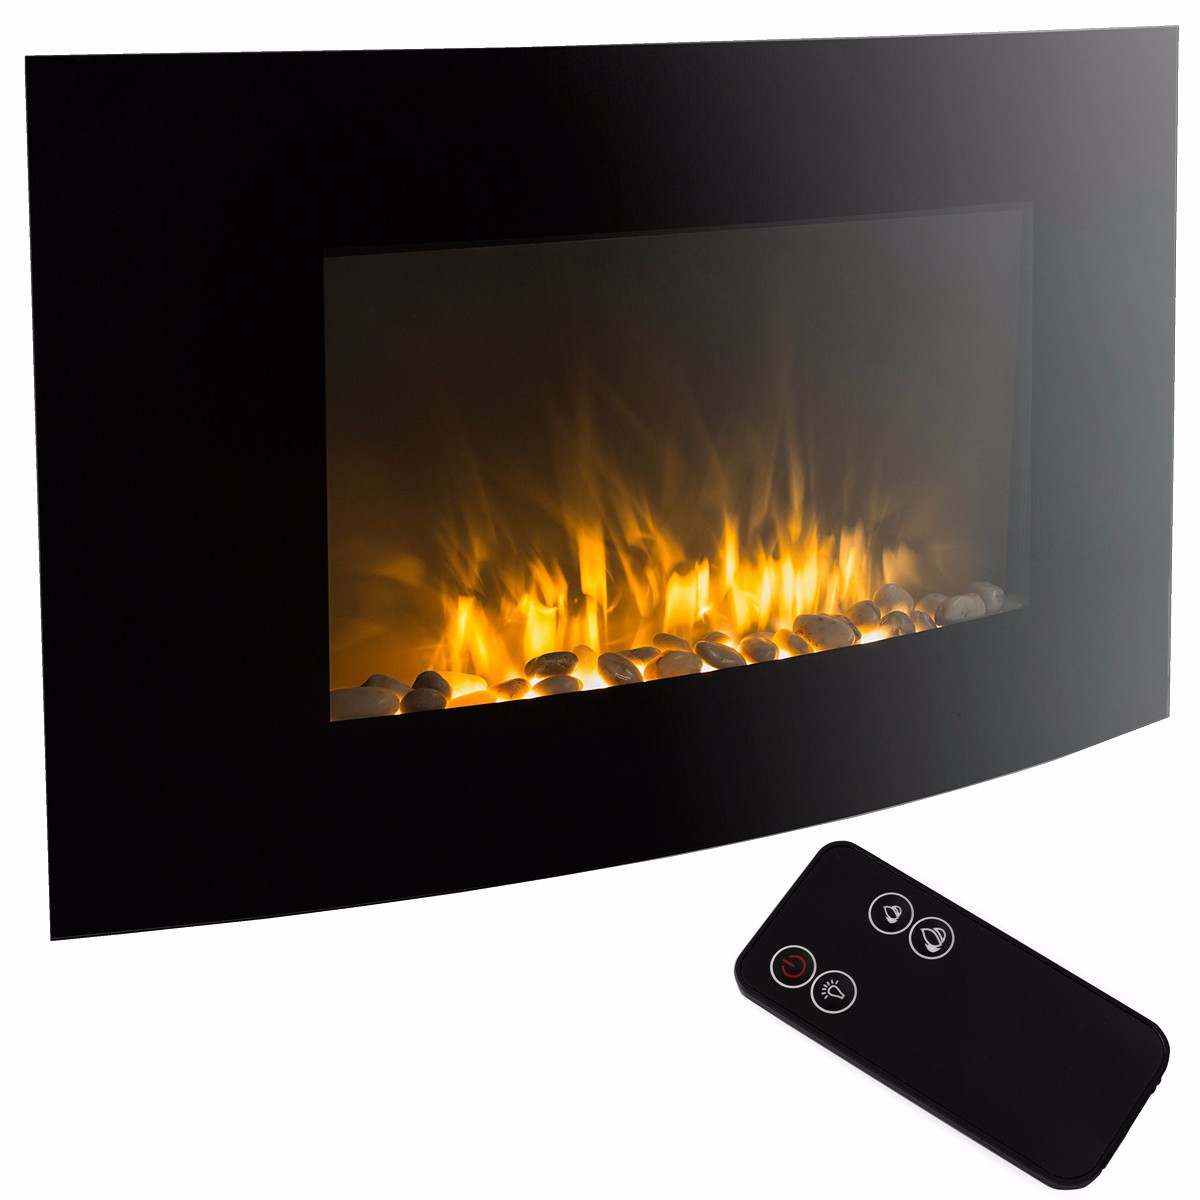 Magikflame Fireplace Elegant Electric Fireplace Insert with Remote Control Fireplace